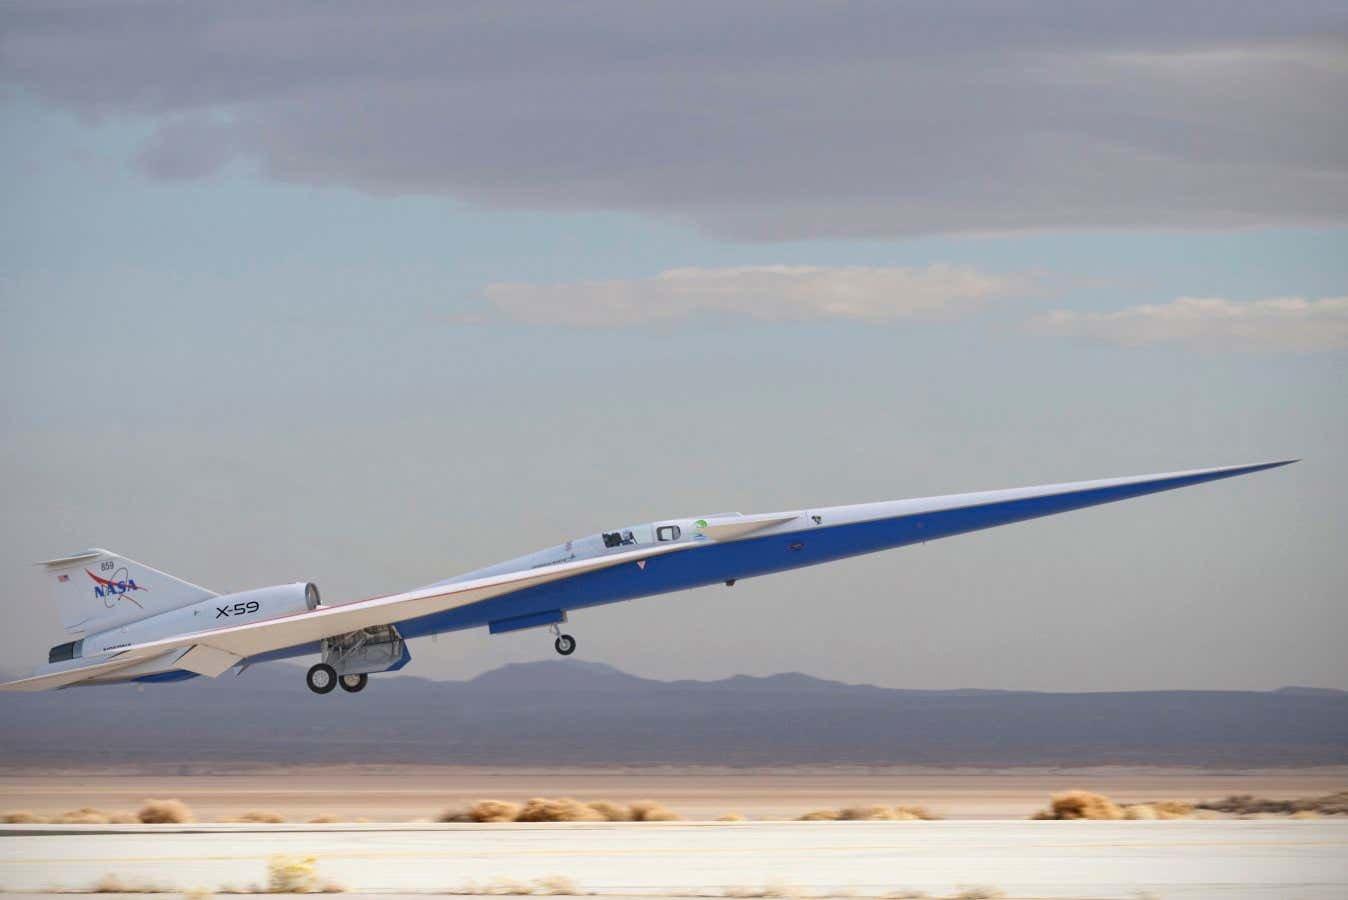 NASA to unveil X-59 supersonic aircraft that makes a 'sonic thump'